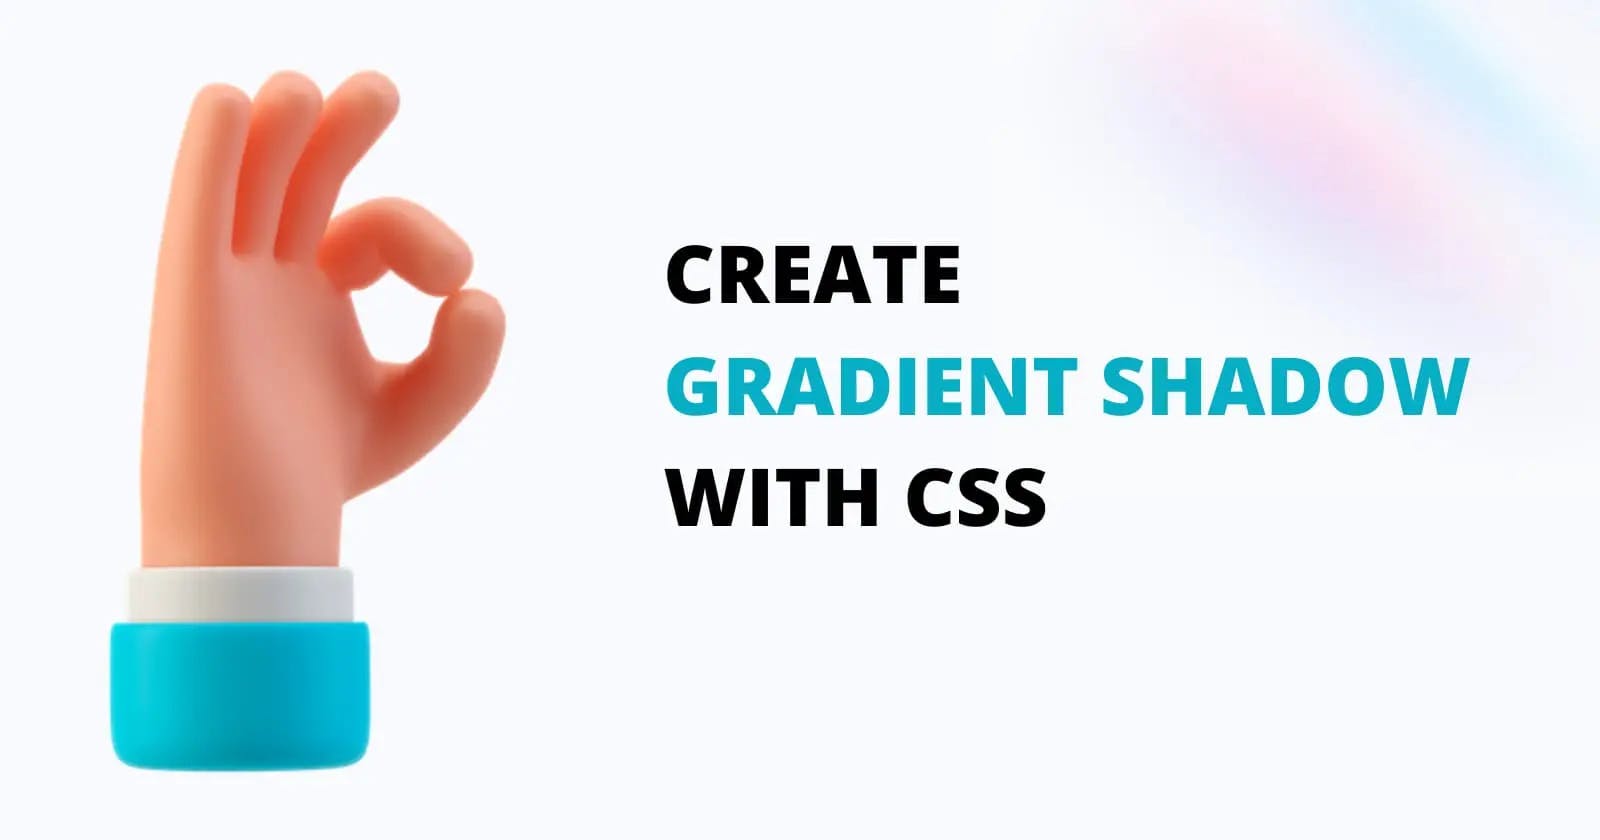 How to create gradient shadow in CSS